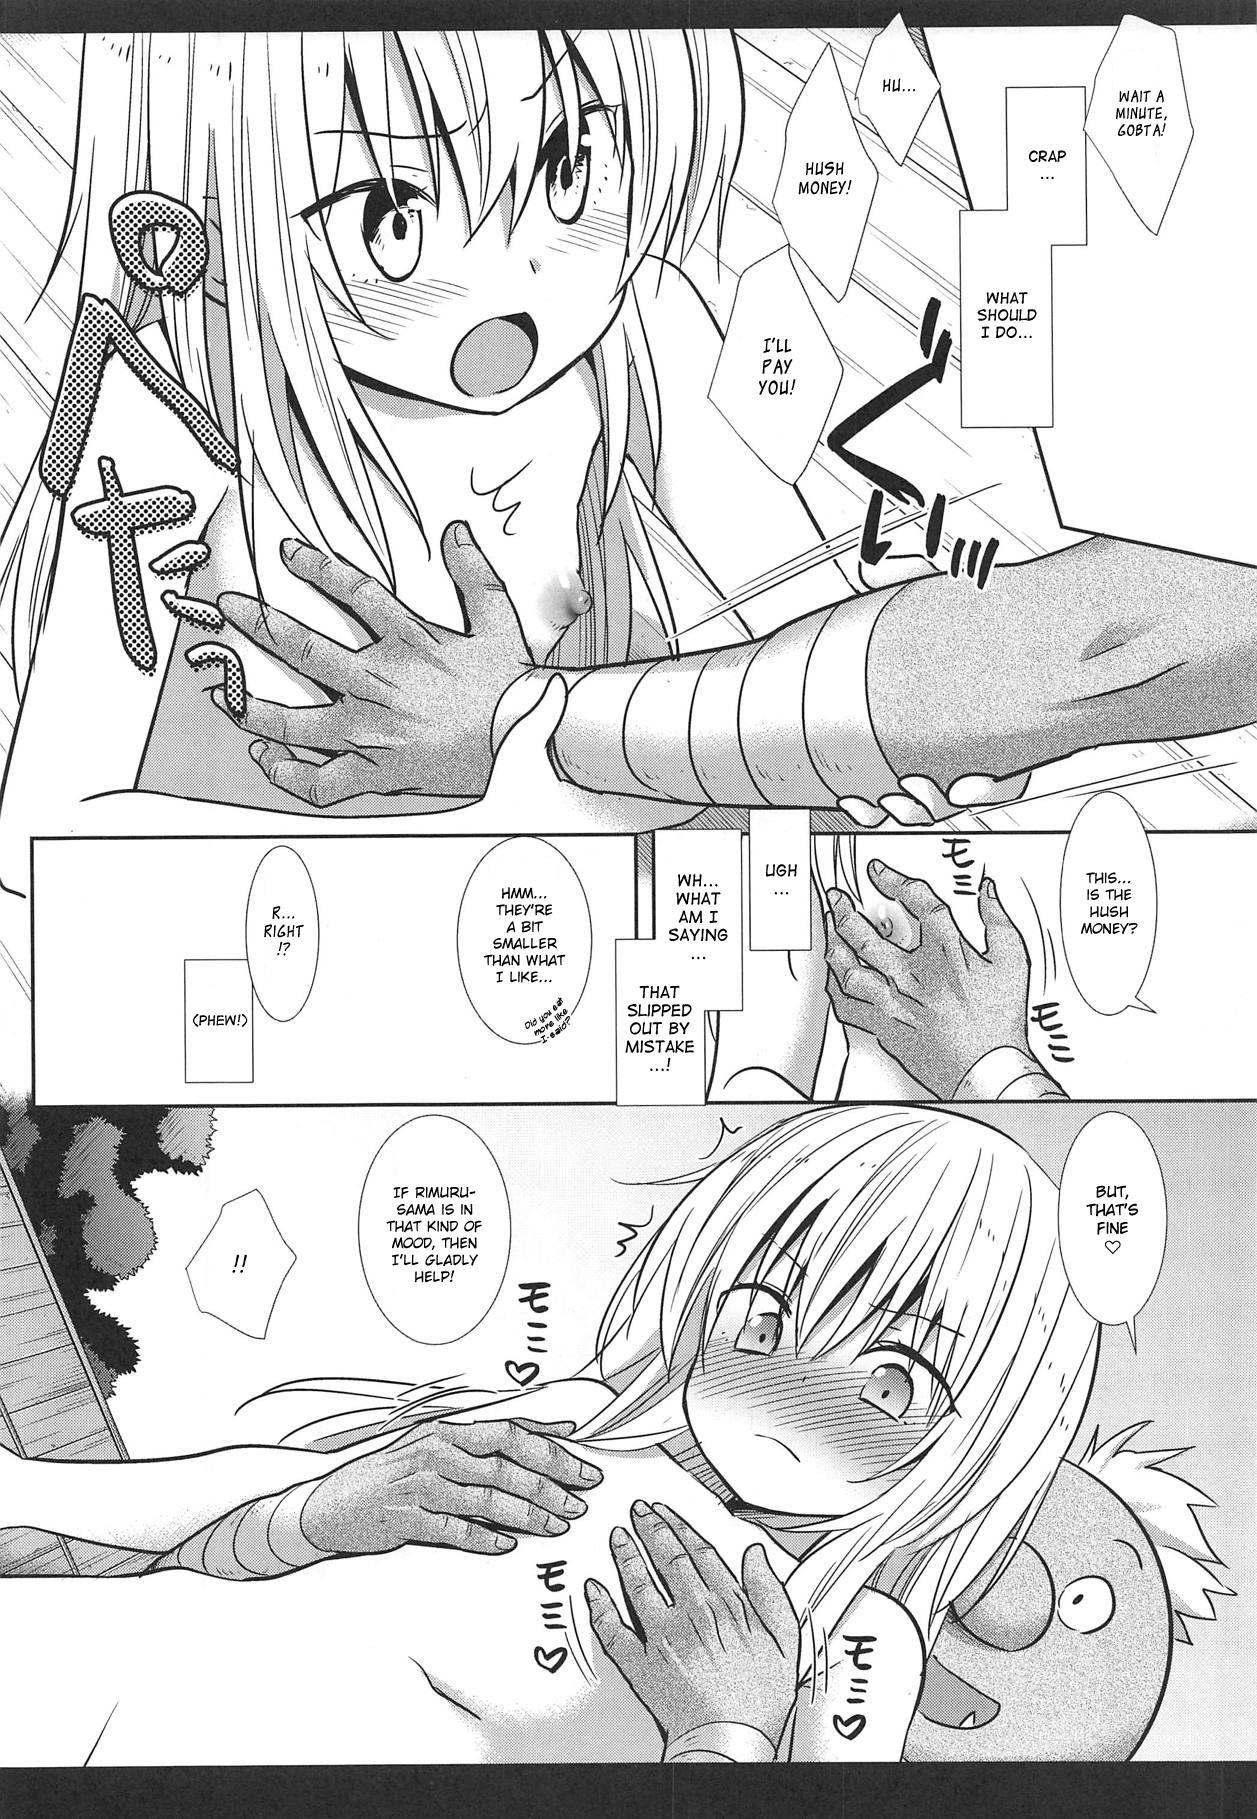 Femdom Clips That Time I Got Reincarnated in a Thin Book! "Even though I was a nearly 40 year old man, I still came like a girl..." - Tensei shitara slime datta ken Housewife - Page 9